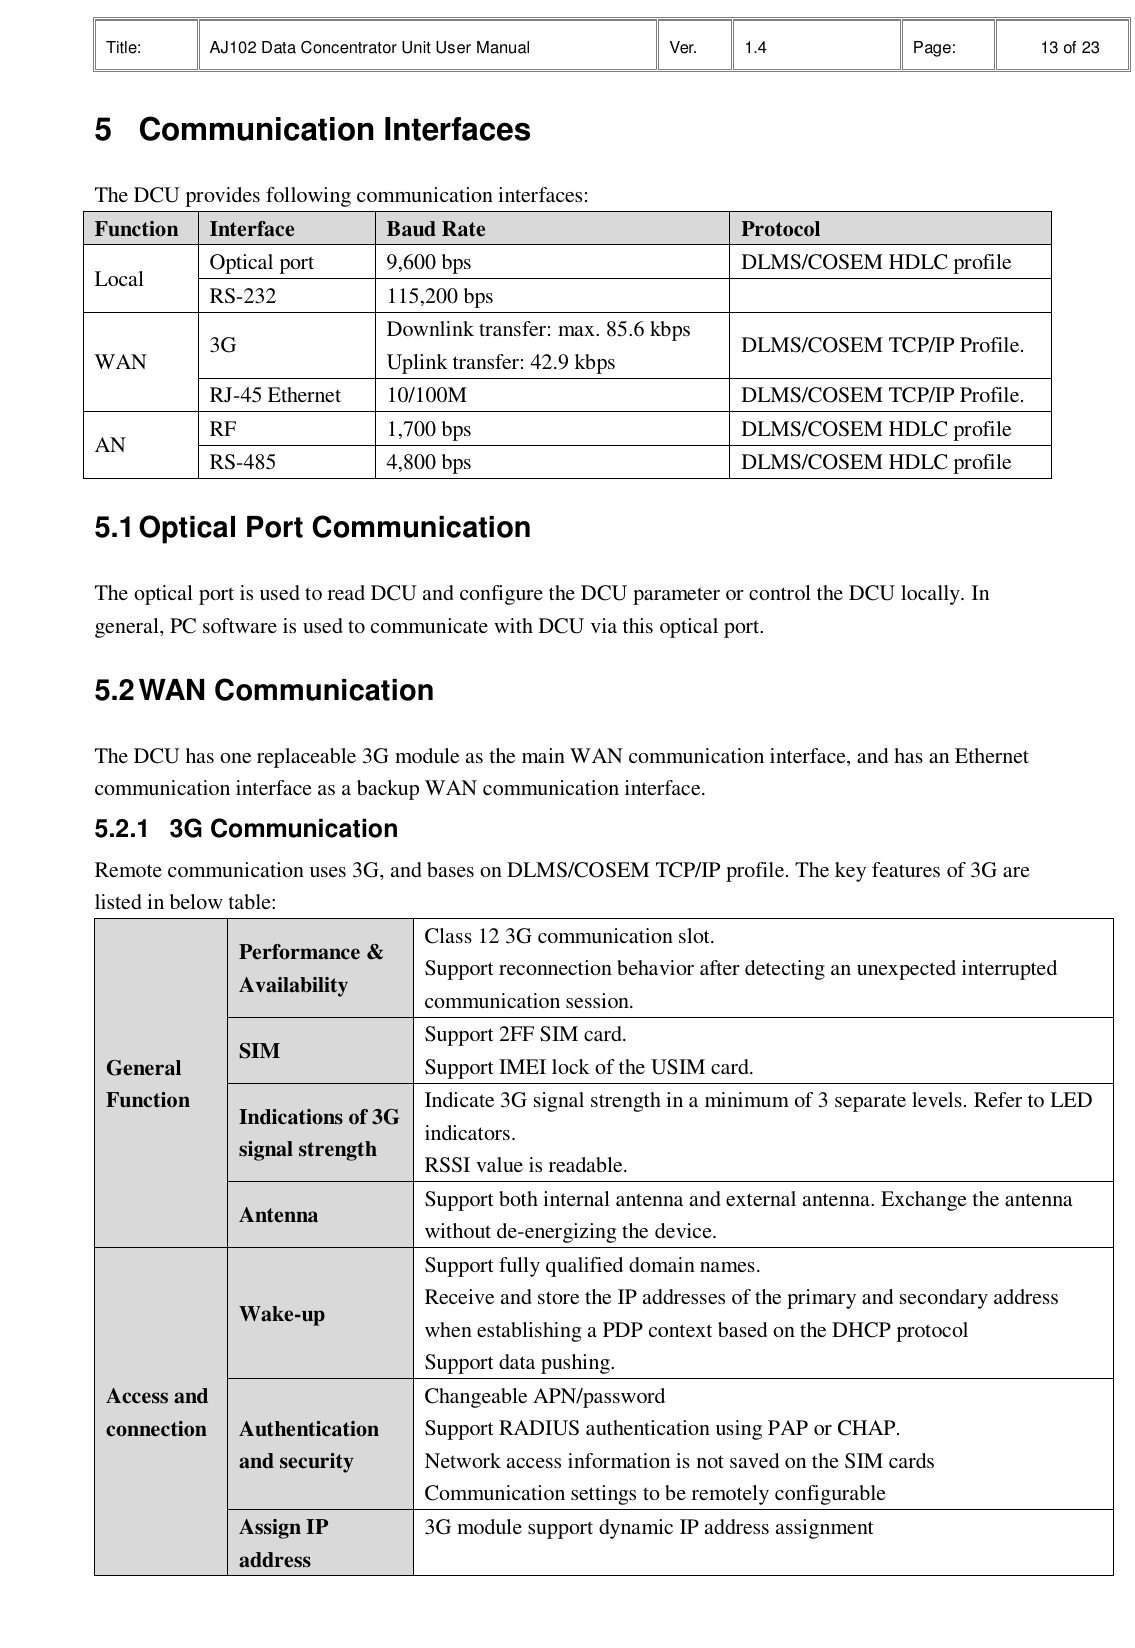 Title: AJ102 Data Concentrator Unit User Manual Ver. 1.4 Page:   13 of 23  5  Communication Interfaces   The DCU provides following communication interfaces: Function Interface Baud Rate Protocol Local Optical port 9,600 bps DLMS/COSEM HDLC profile   RS-232 115,200 bps  WAN 3G Downlink transfer: max. 85.6 kbps Uplink transfer: 42.9 kbps DLMS/COSEM TCP/IP Profile. RJ-45 Ethernet 10/100M DLMS/COSEM TCP/IP Profile. AN RF   1,700 bps DLMS/COSEM HDLC profile RS-485 4,800 bps DLMS/COSEM HDLC profile 5.1 Optical Port Communication The optical port is used to read DCU and configure the DCU parameter or control the DCU locally. In general, PC software is used to communicate with DCU via this optical port. 5.2 WAN Communication The DCU has one replaceable 3G module as the main WAN communication interface, and has an Ethernet communication interface as a backup WAN communication interface. 5.2.1  3G Communication Remote communication uses 3G, and bases on DLMS/COSEM TCP/IP profile. The key features of 3G are listed in below table:   General Function Performance &amp; Availability Class 12 3G communication slot. Support reconnection behavior after detecting an unexpected interrupted communication session.     SIM Support 2FF SIM card. Support IMEI lock of the USIM card. Indications of 3G signal strength Indicate 3G signal strength in a minimum of 3 separate levels. Refer to LED indicators. RSSI value is readable. Antenna Support both internal antenna and external antenna. Exchange the antenna without de-energizing the device. Access and connection Wake-up Support fully qualified domain names. Receive and store the IP addresses of the primary and secondary address when establishing a PDP context based on the DHCP protocol Support data pushing. Authentication and security Changeable APN/password Support RADIUS authentication using PAP or CHAP. Network access information is not saved on the SIM cards Communication settings to be remotely configurable Assign IP address 3G module support dynamic IP address assignment  